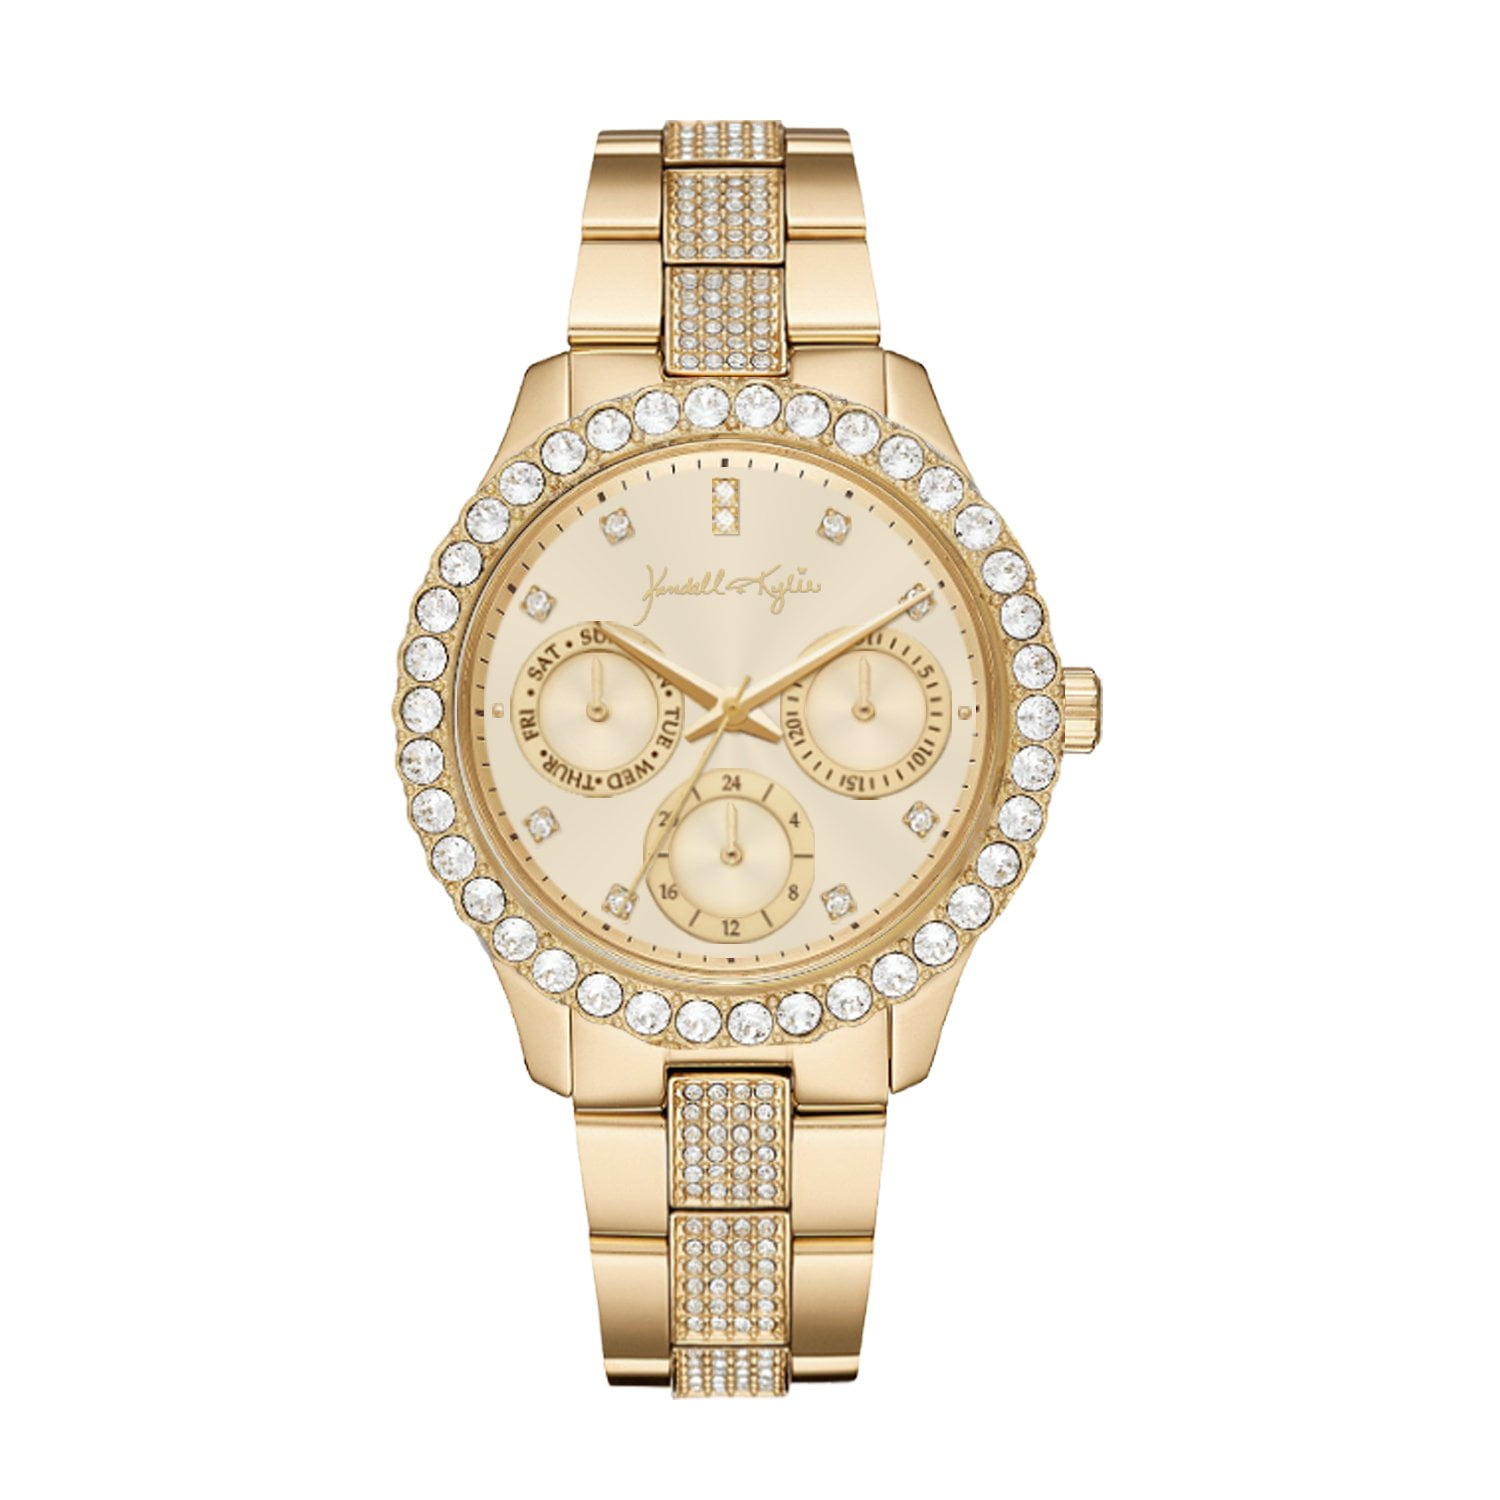 Kendall + Kylie - Kendall + Kylie: Gold Toned Metal Chronograph Analog ...